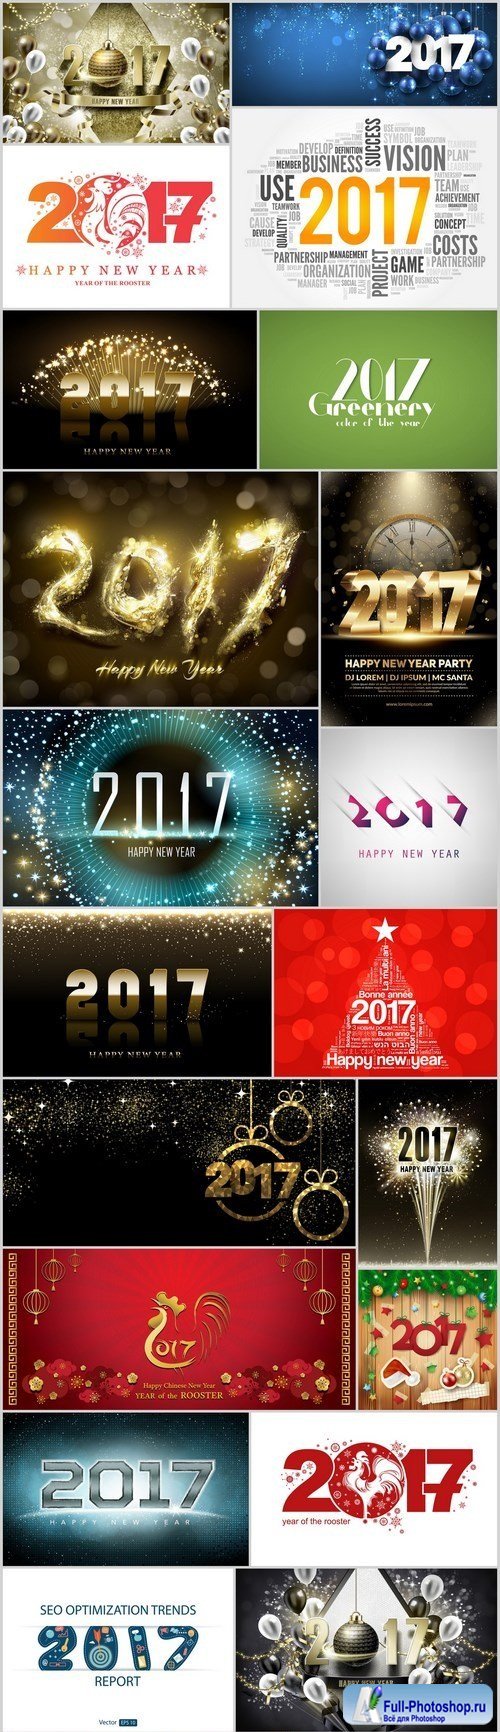 New Year Design 2017 part 2 - 24xEPS Vector Stock